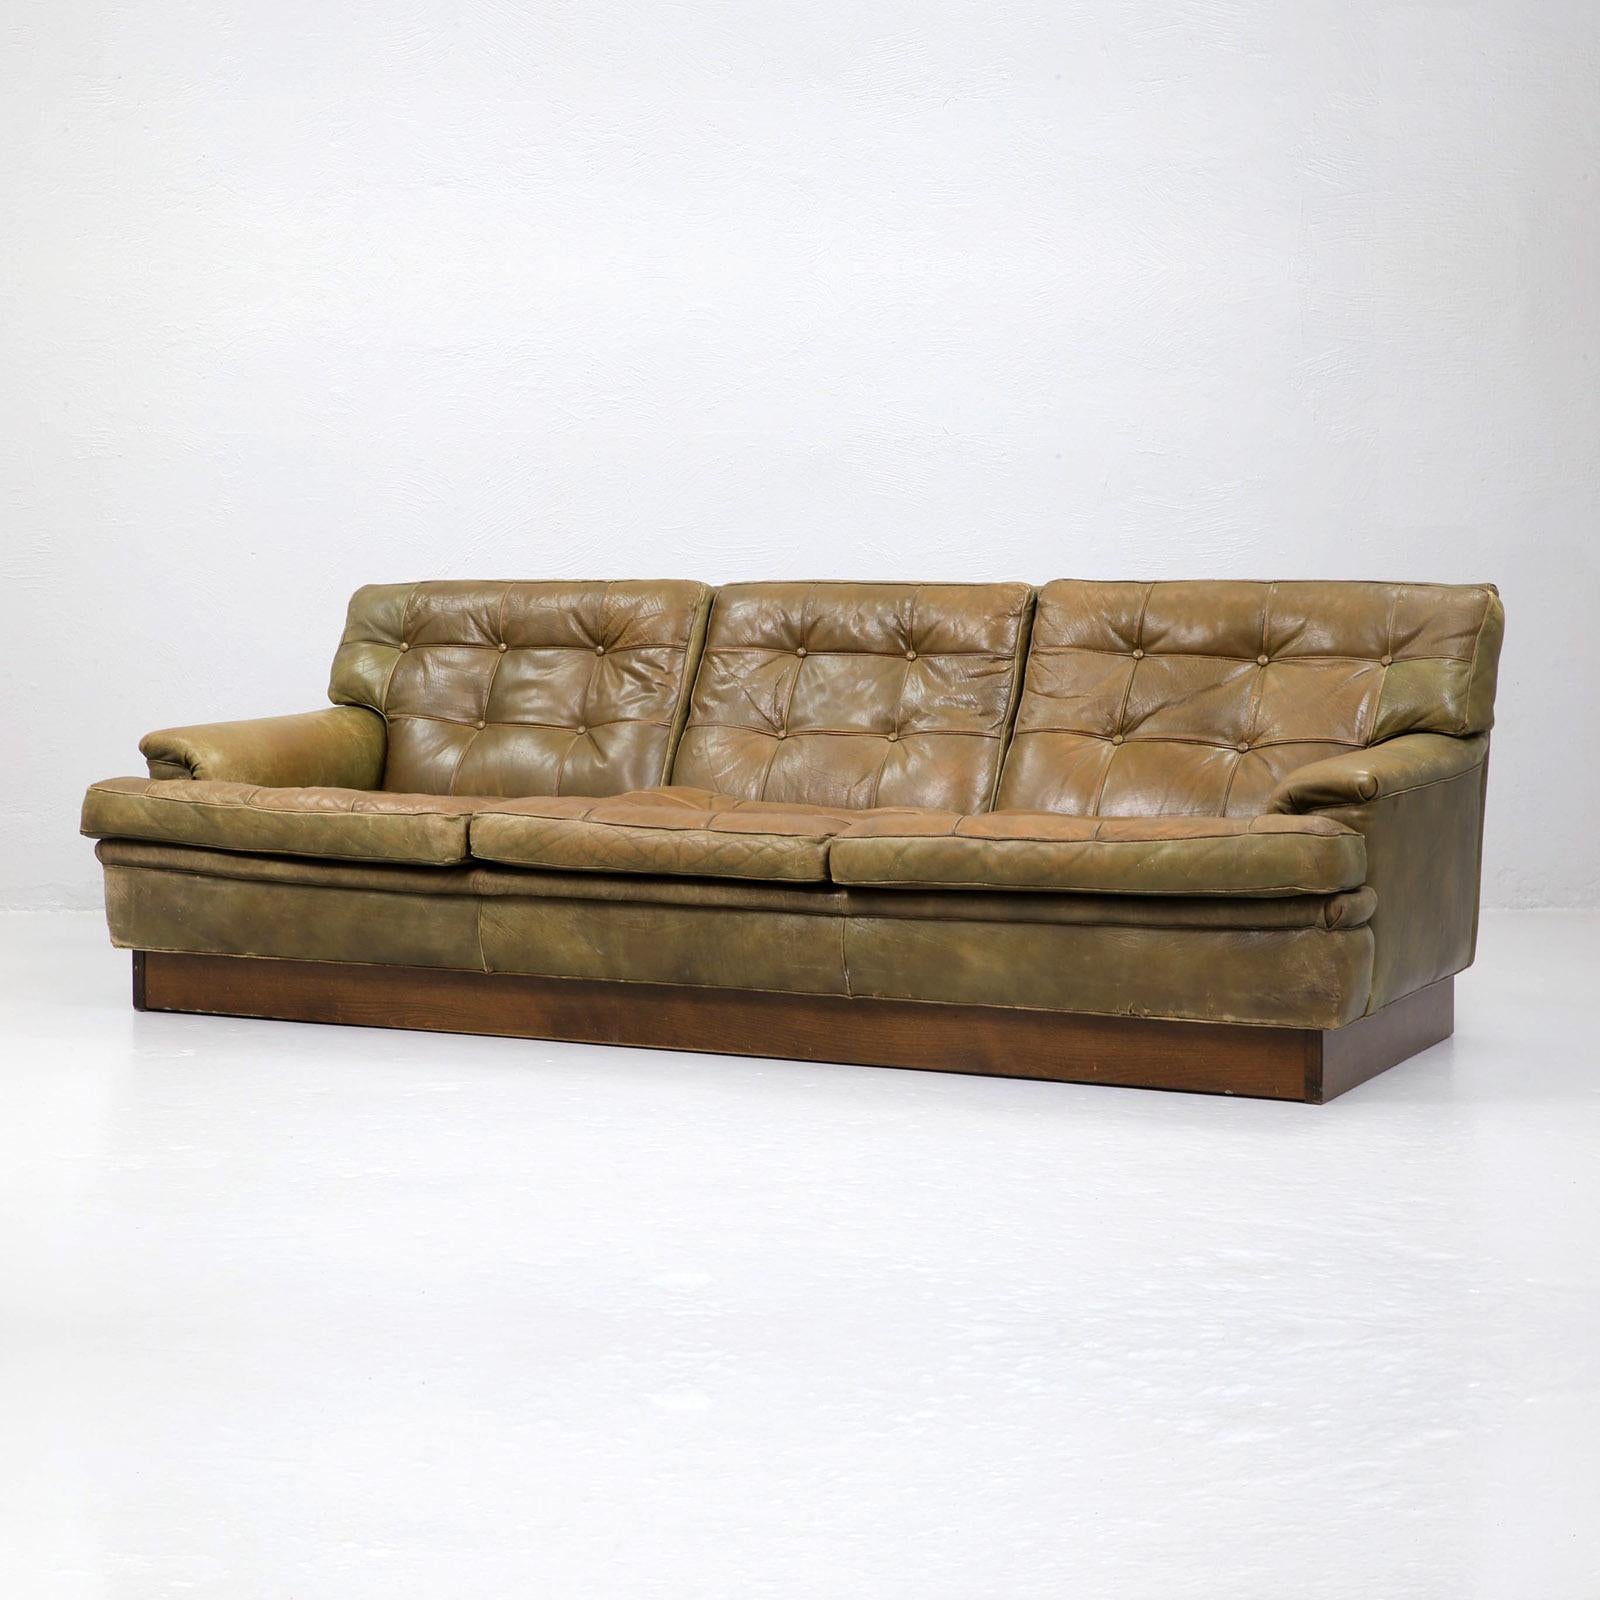 Arne Norell, 'Mexico' sofa, leather and teak, Sweden, 1960s.

This comfortable three seats sofa is designed by Arne Norell and holds a robust, sturdy character. The base is made of a unified wooden foot in warm color. The sofa is upholstered in a